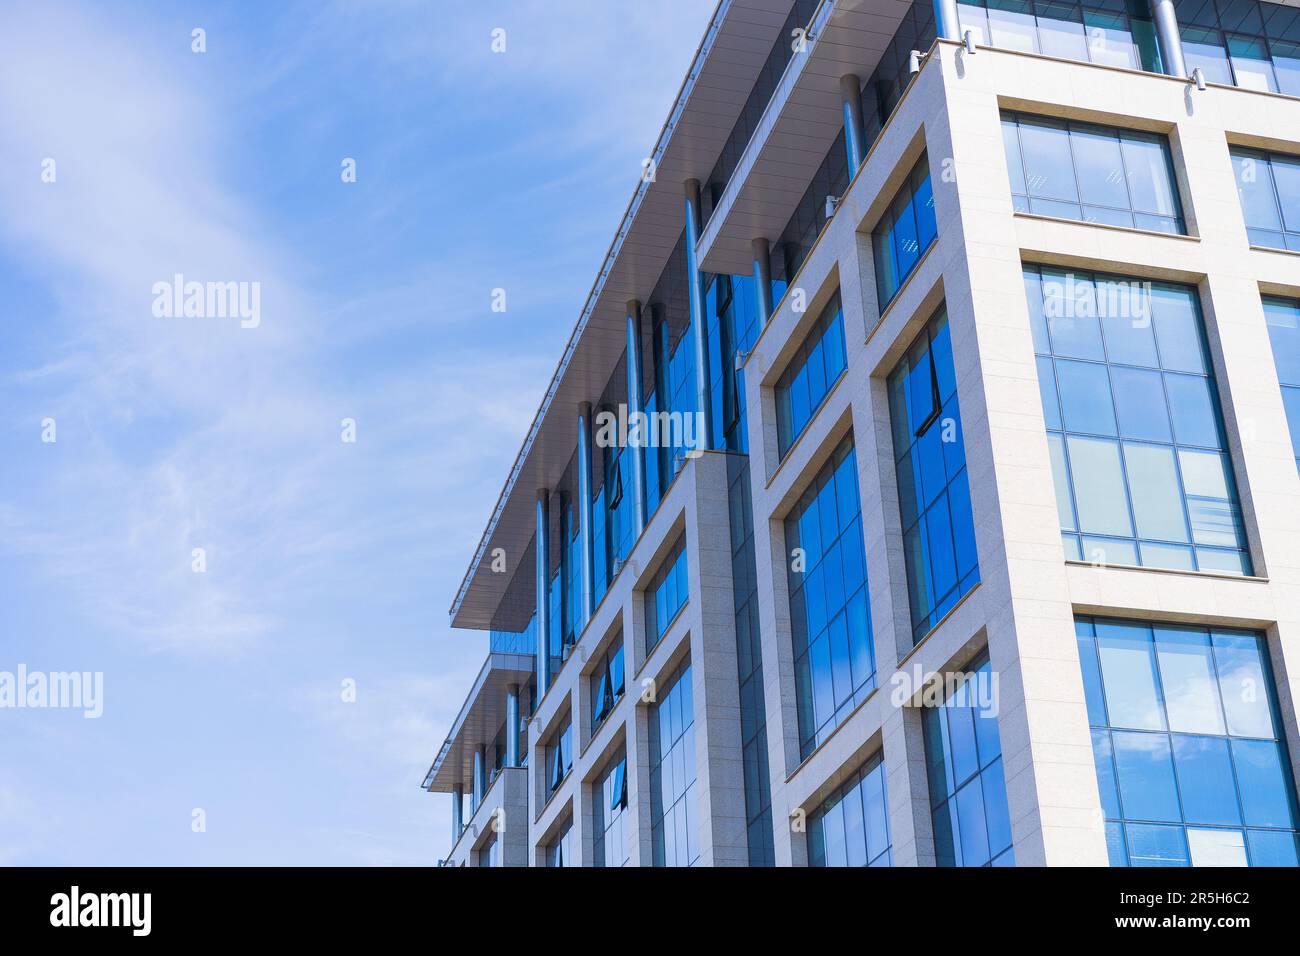 Stylish Glass Facade of blue Tinted Semi-Transparent Glass Building Against Blue Sky with Sunbeams. Modern Architecture Concept Stock Photo